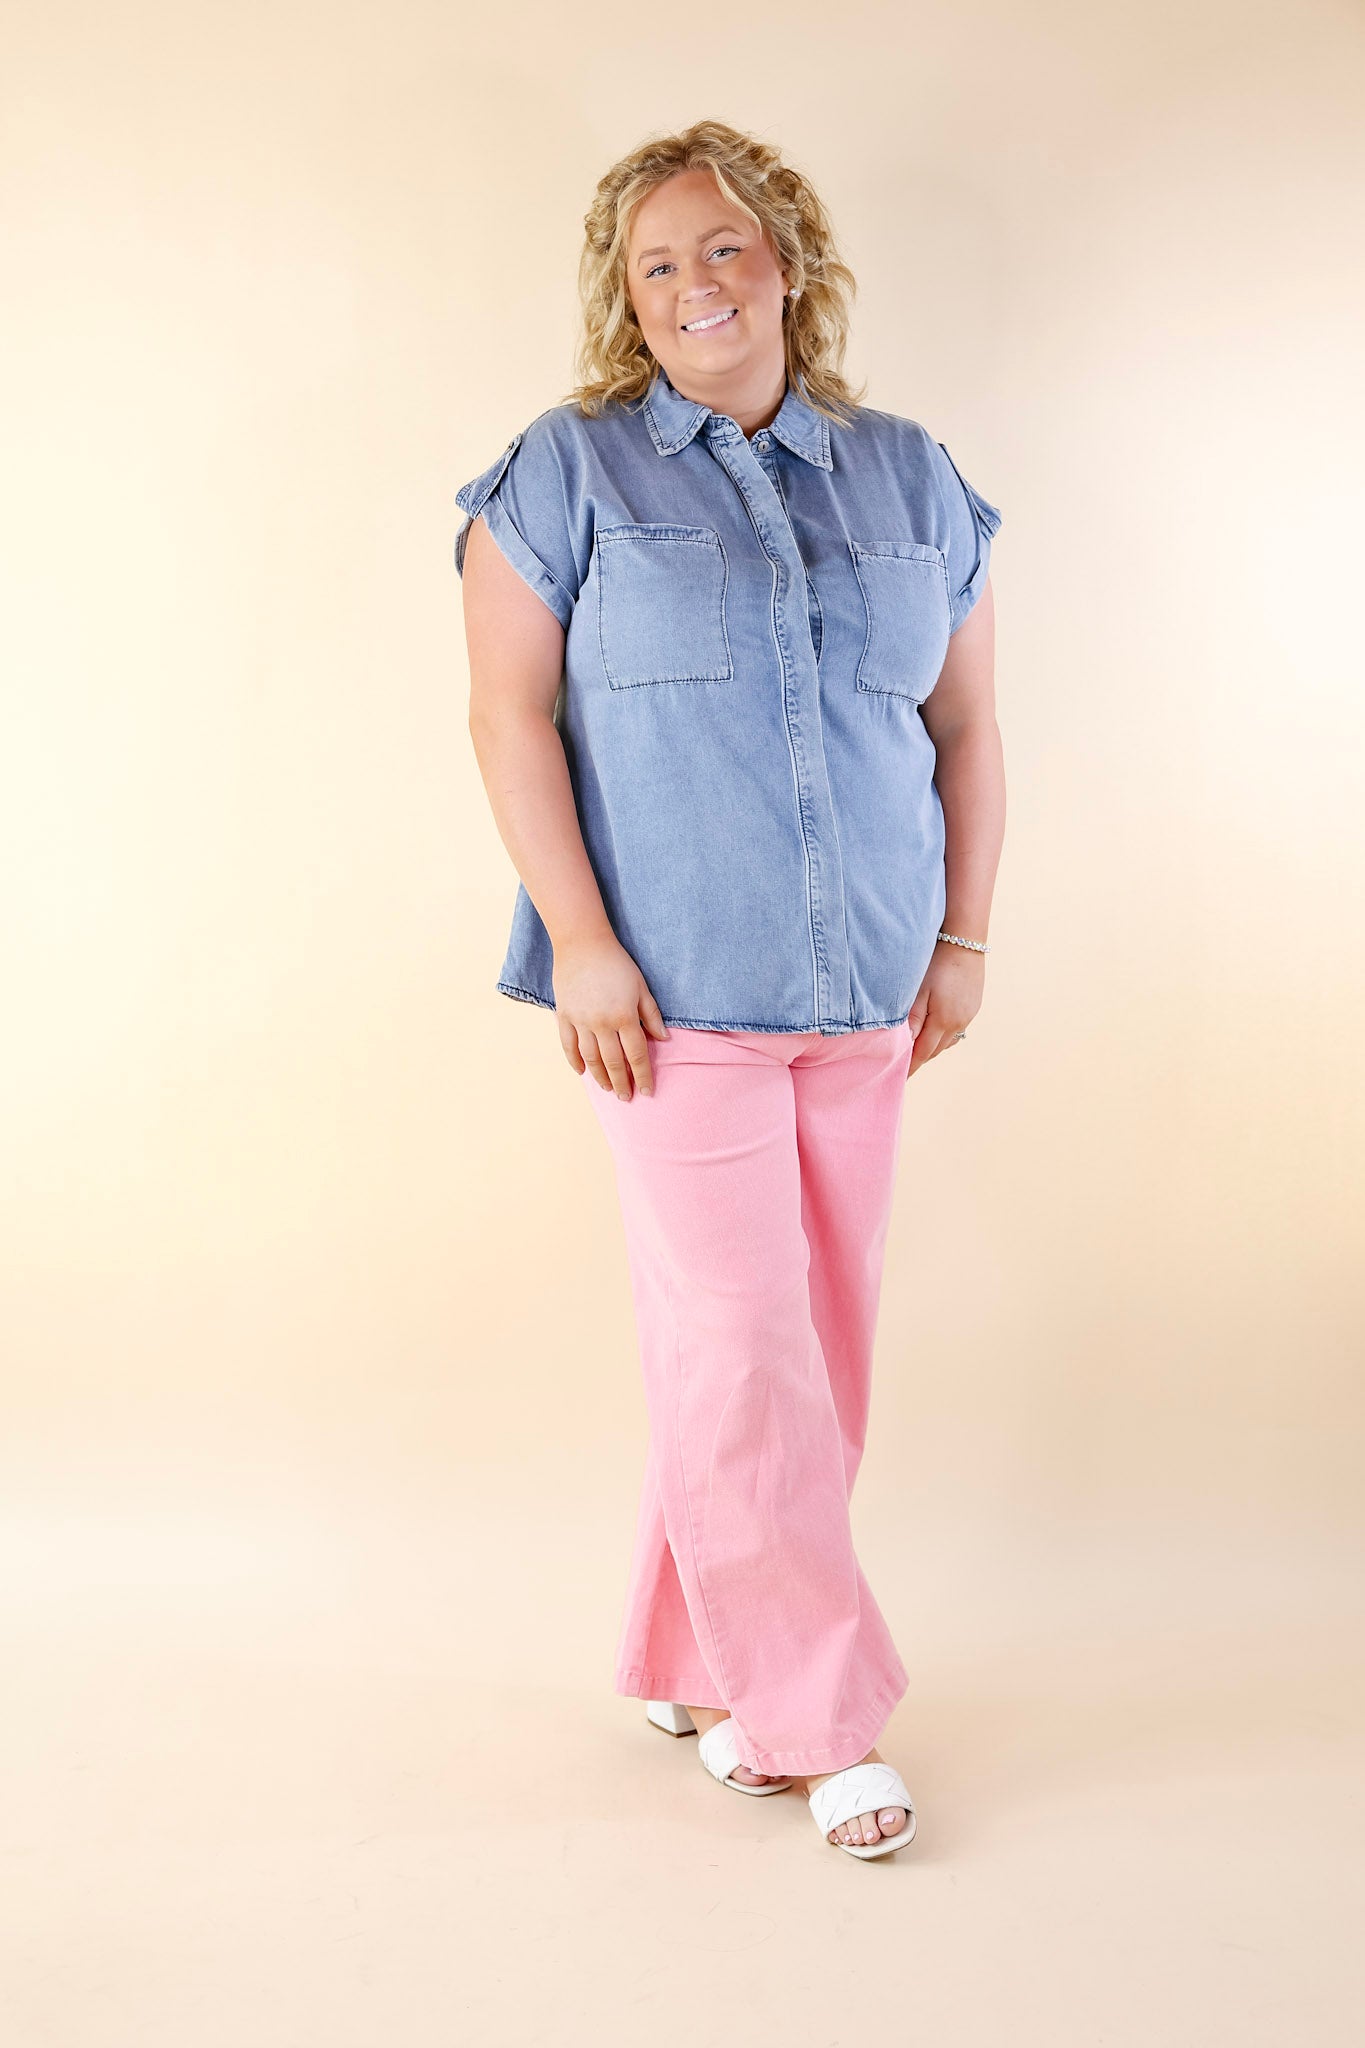 Fast Forward Denim Hidden Button Up Top with Short Sleeves in Medium Wash - Giddy Up Glamour Boutique